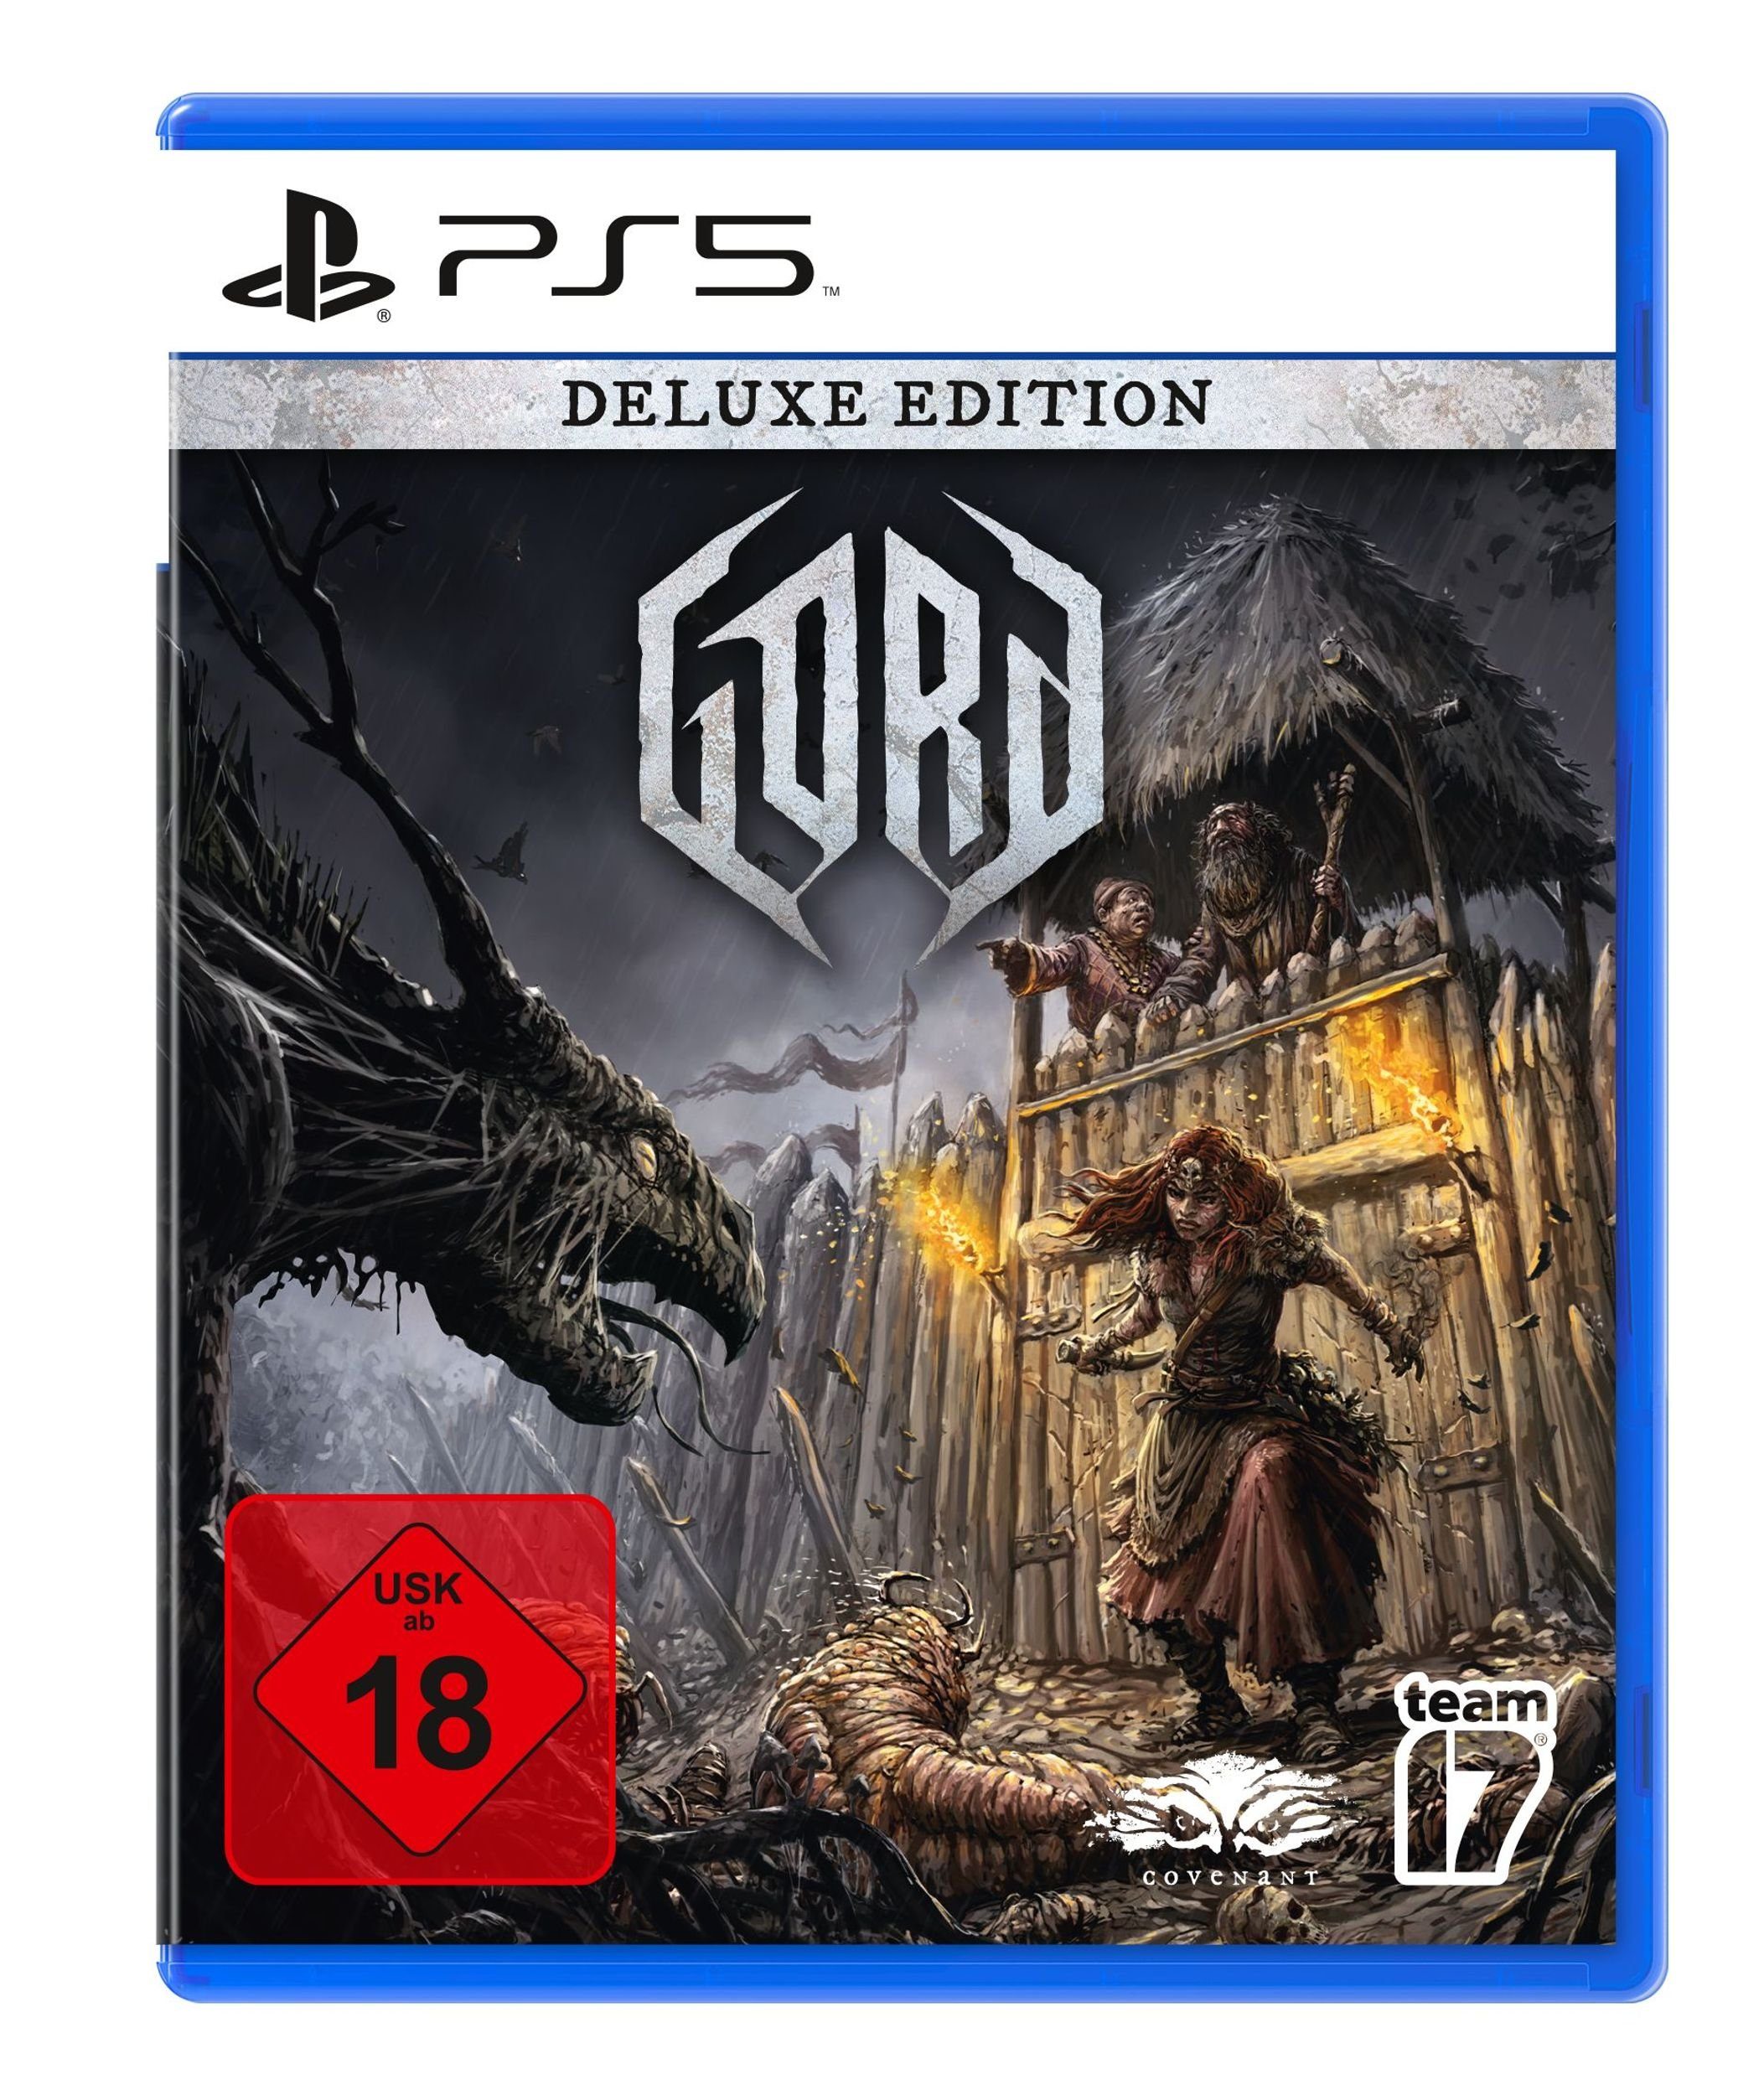 Gord Deluxe Edition Playstation 5